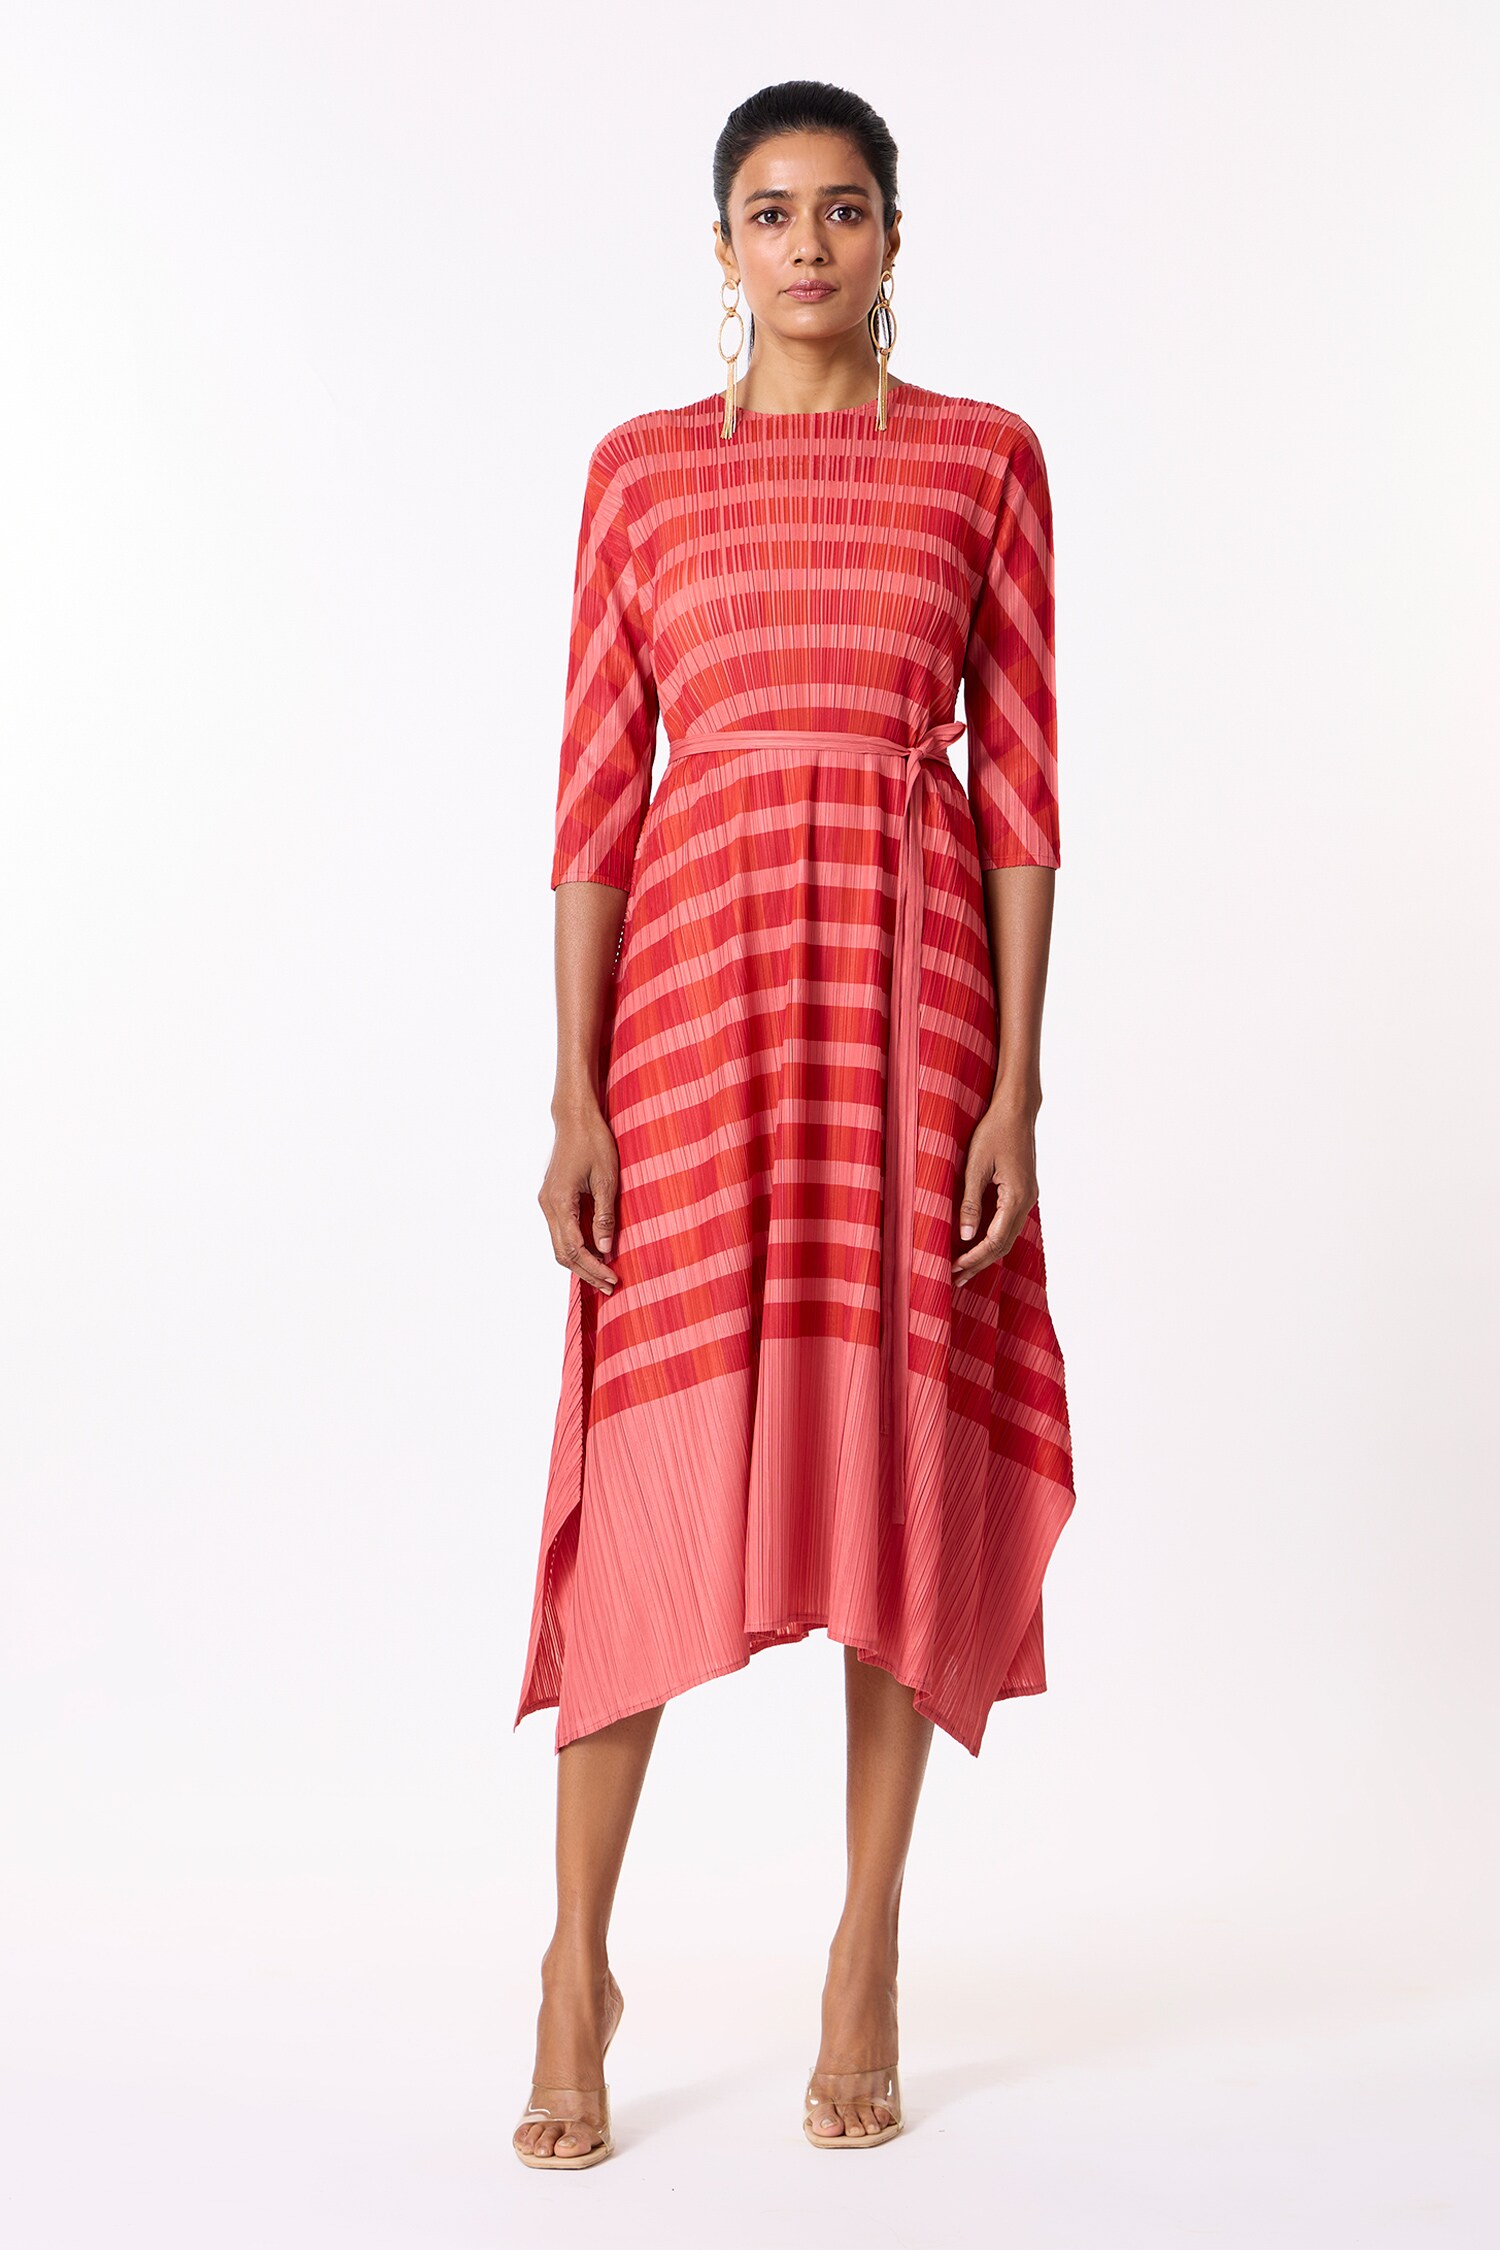 Buy Lyra Printed Asymmetric Dress With Belt by Scarlet Sage at Aza Fashions